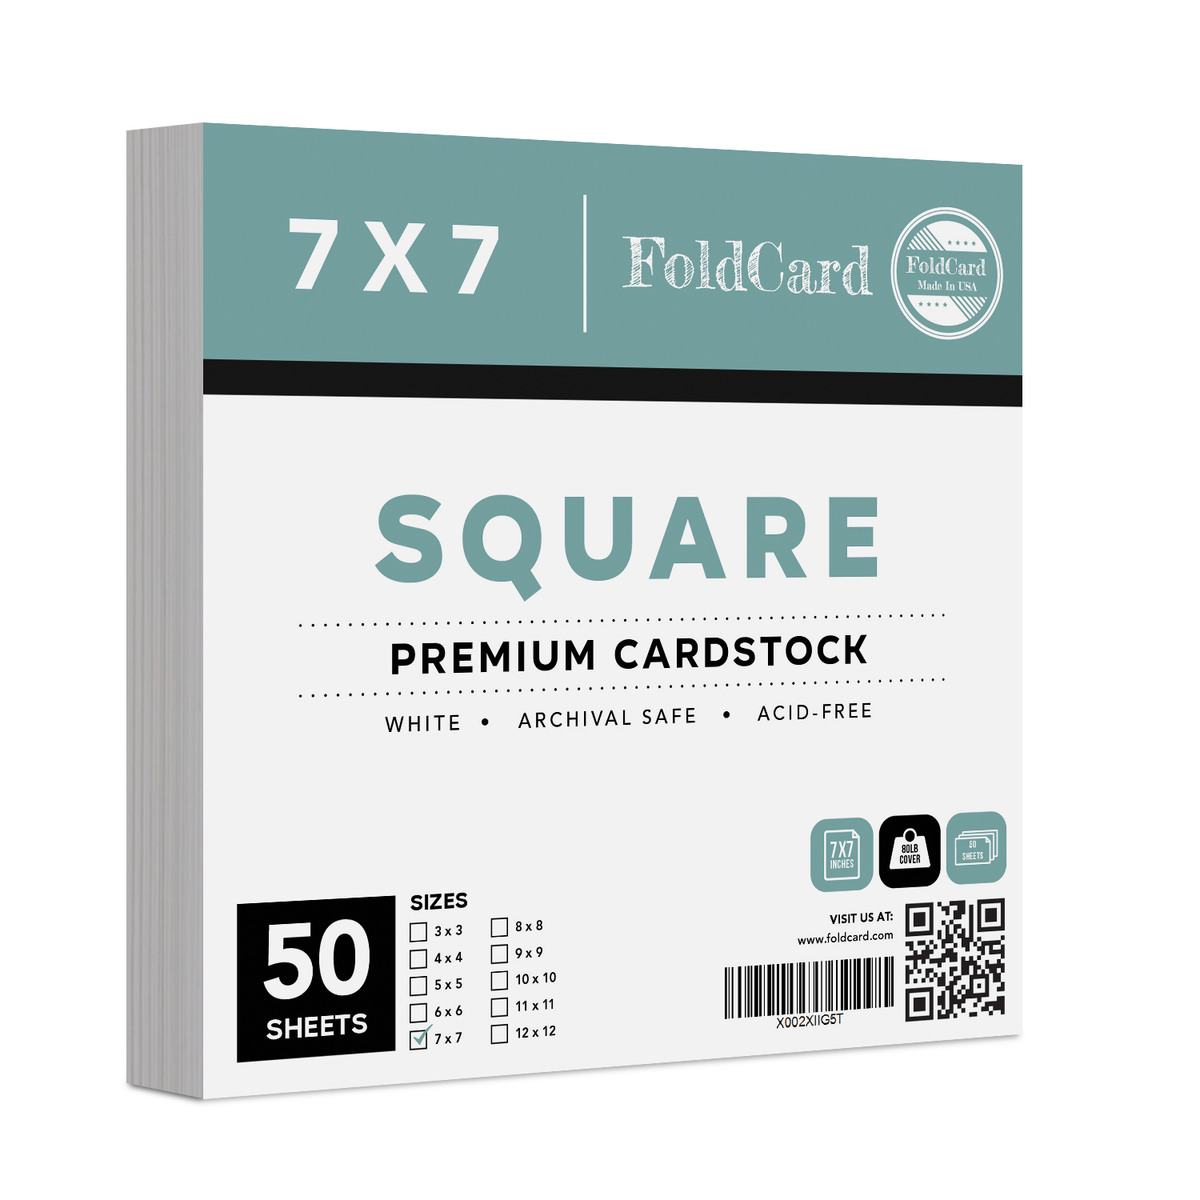 High-Quality White Square Cardstock 80 LB Cover, 7” x 7”, 50 Sheets Per Pack.